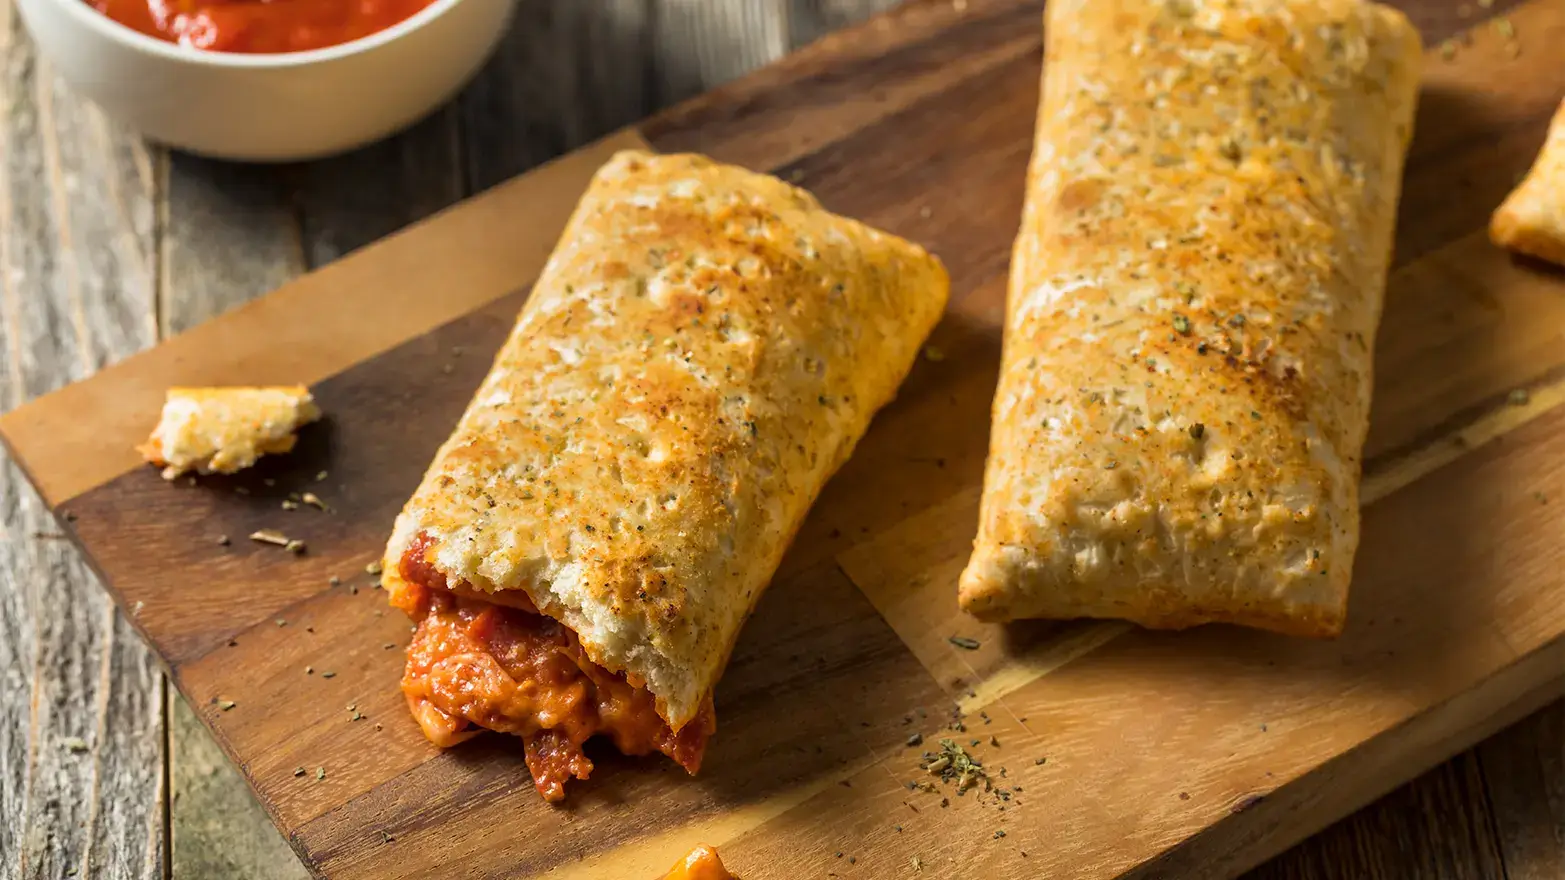 personal pizza pockets for birthday dinner ideas